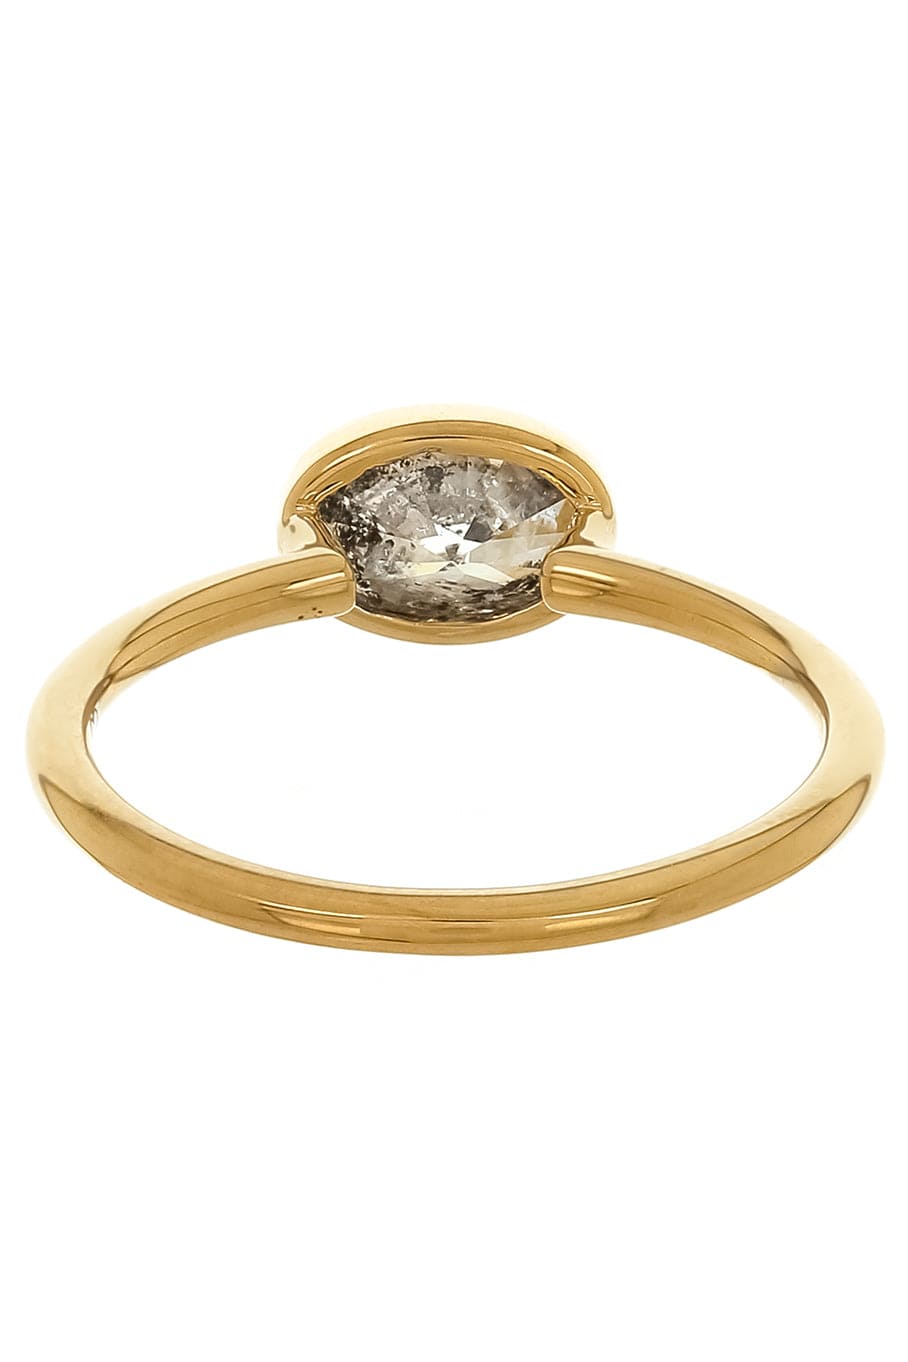 WITH LOVE-The Skinny Ring-YELLOW GOLD